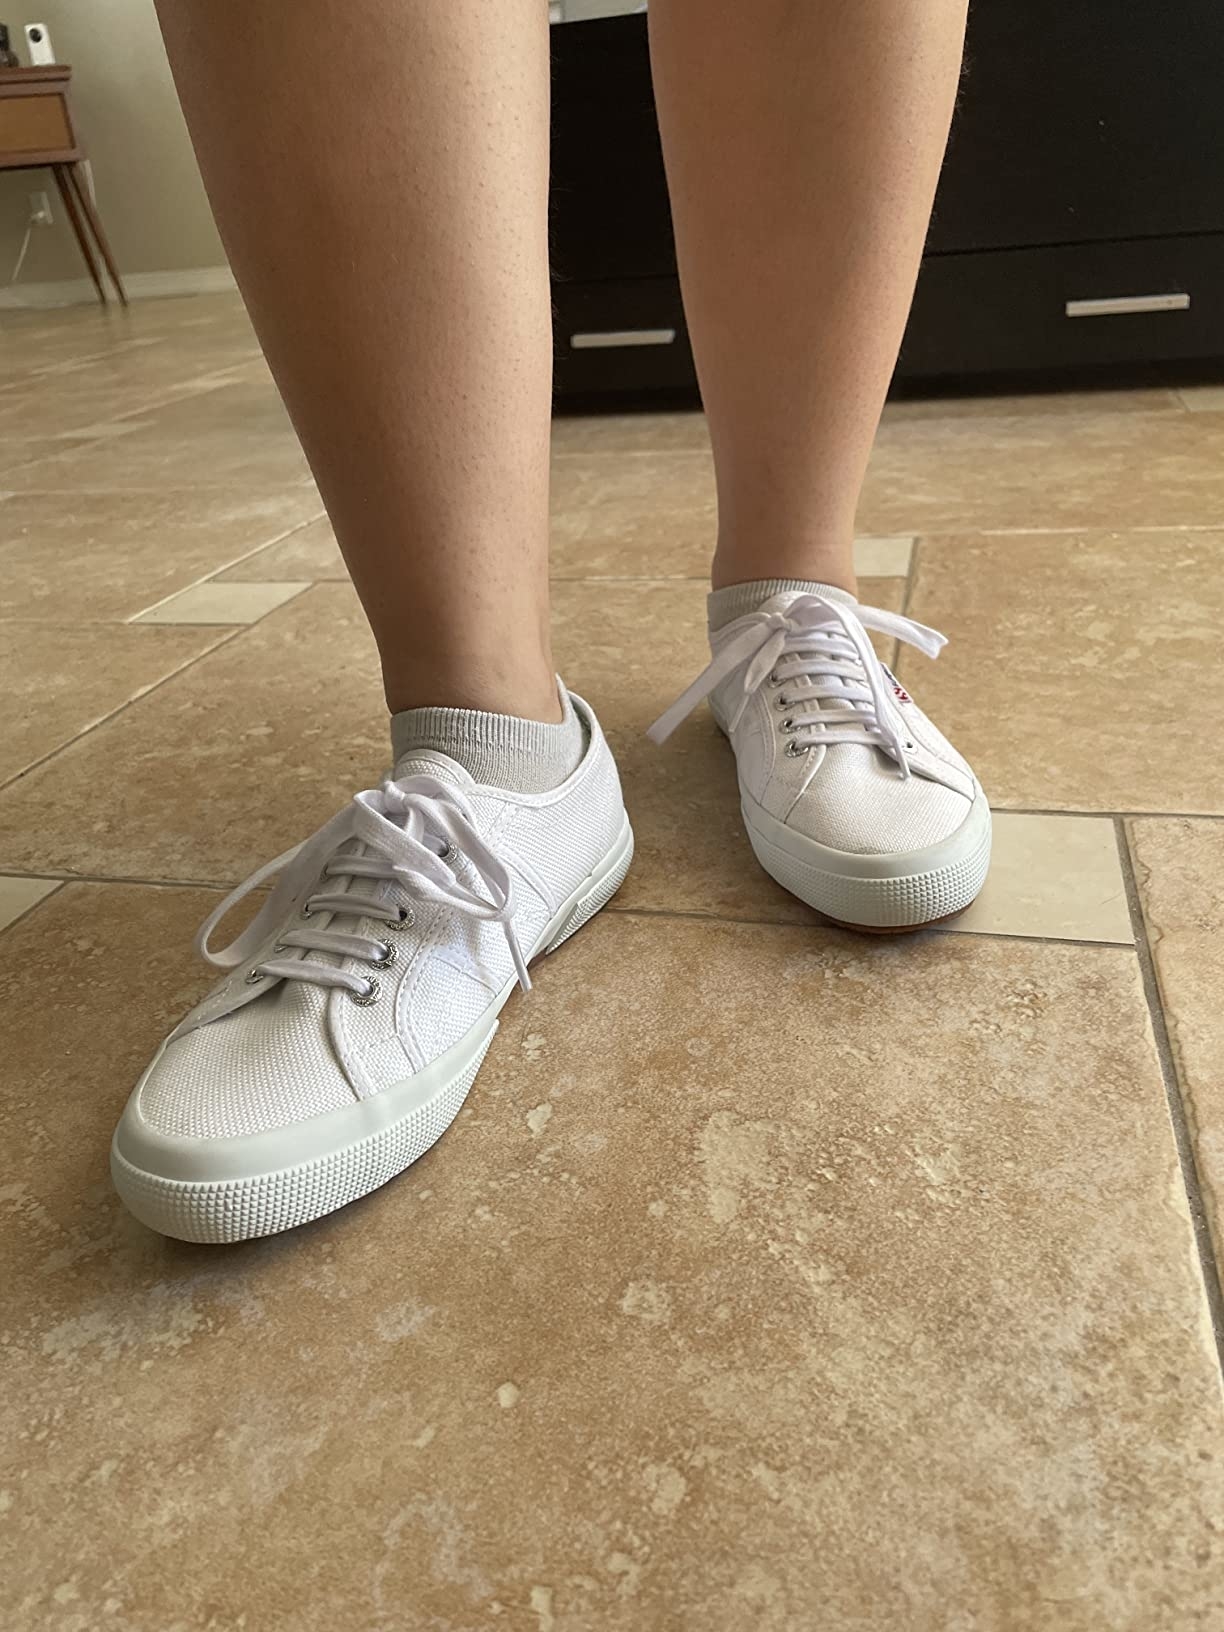 Reviewer standing wearing white sneakers with socks